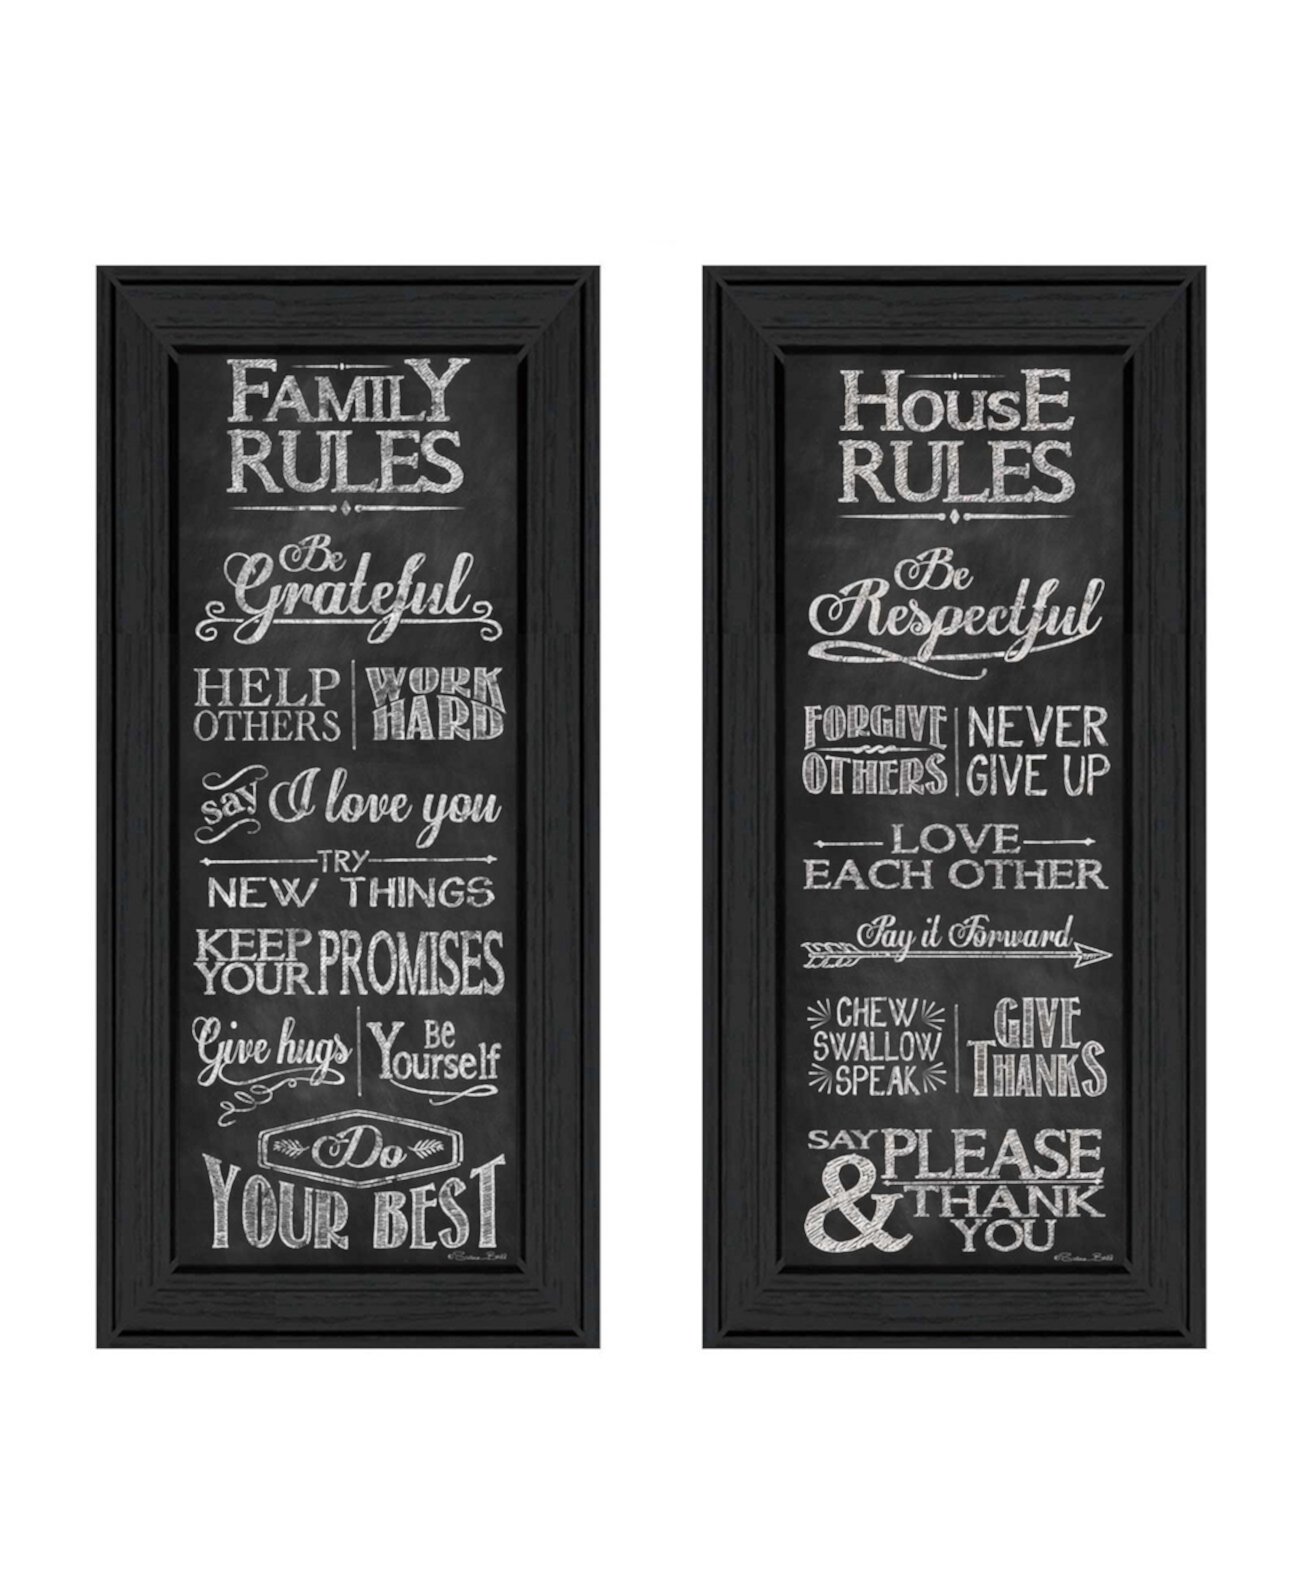 House Rules. Family Rules. House Rules Template. Family Rules by BLACKSHEEPOVCA. Rule collection